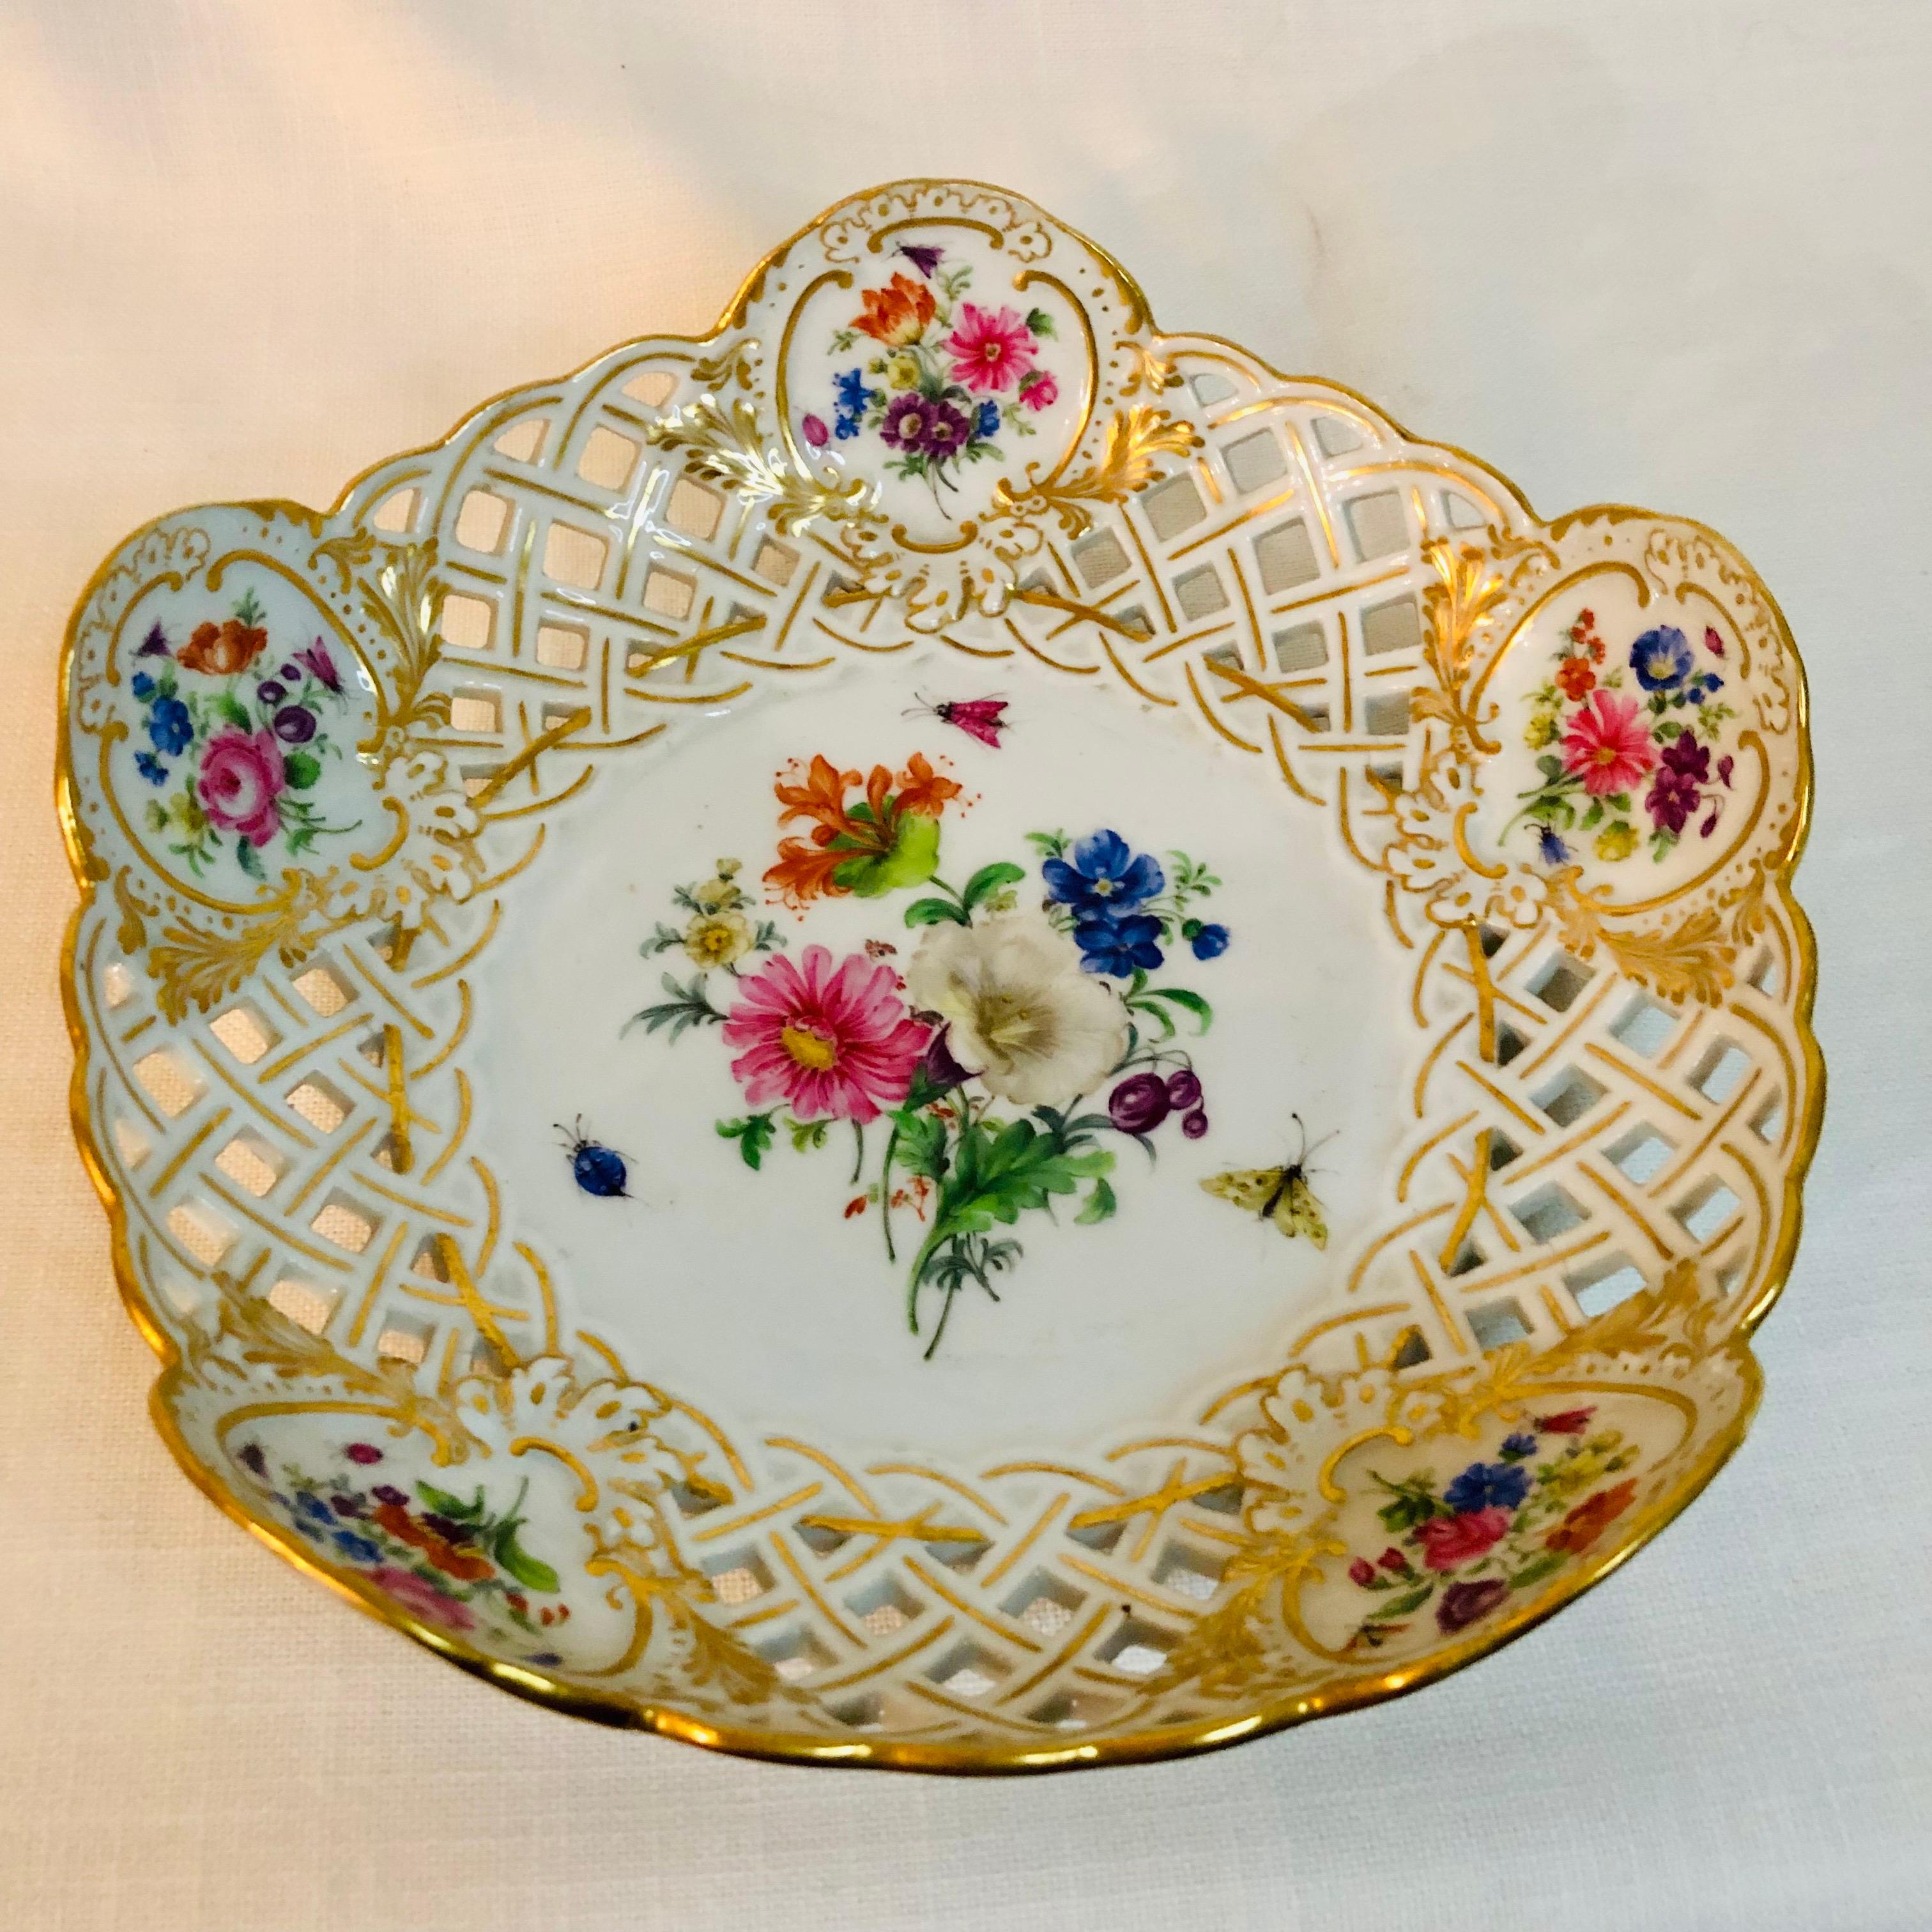 I am offering you this fabulous Meissen reticulated fluted bowl from the 1880s. It has a beautifully painted central flower bouquet with accents of insects on a white porcelain ground. Inside the gilt border, are five smaller flower bouquets, each